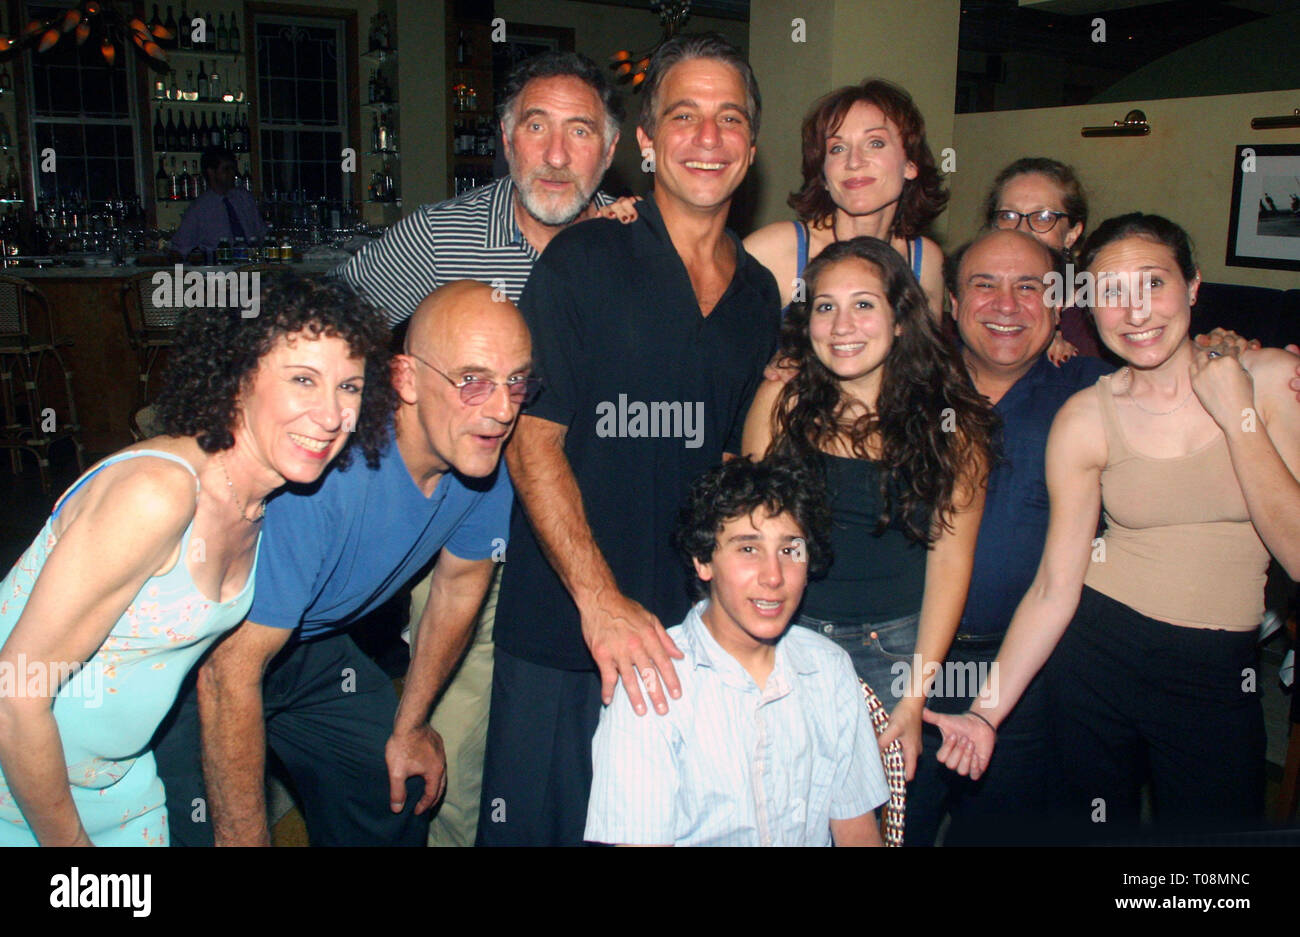 THE CAST OF 'TAXI' RHEA PEARLMAN, CHRISTOPHER LLOYD, JUDD HIRSCH, TONY DANZA, MARILU HENNER, DANNY DeVITO, CAROL KANE ALONG WITH DeVITO AND PEARLMAN'S CHILDREN GRACIE LUCIE AND JAKE AT THE WASHINGTON PARK RESTAURANT OWNED BY HENNER'S SISTER 07/05/02 Photo By John Barrett/PHOTOlink Stock Photo